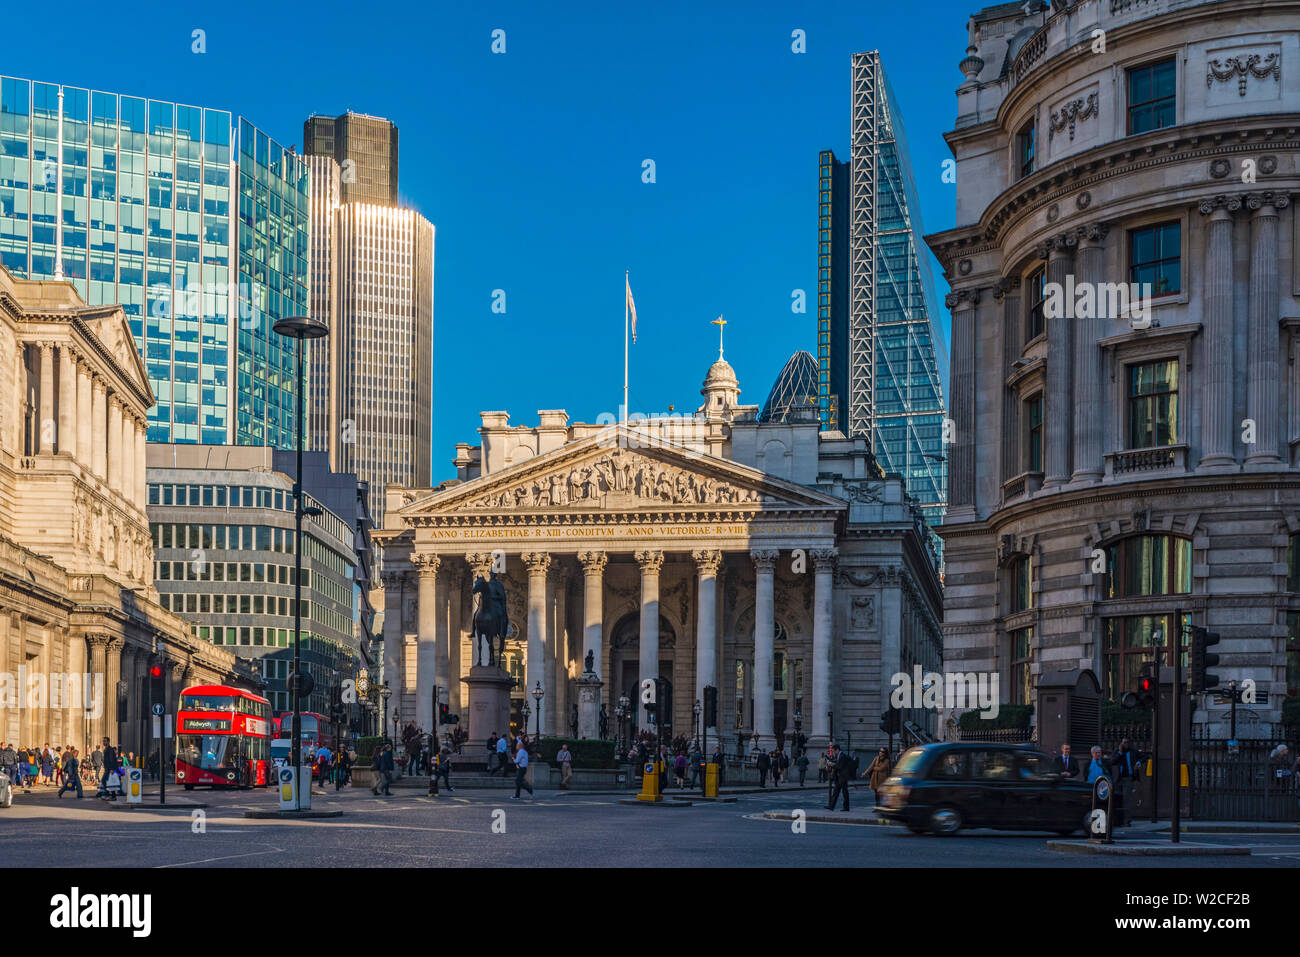 UK, England, London, The City, Bank of England (left) and the Royal Exchange, Tower 42 (formerly NatWest Tower) and The Cheesegrater (122 Leadenhall Street) in background Stock Photo